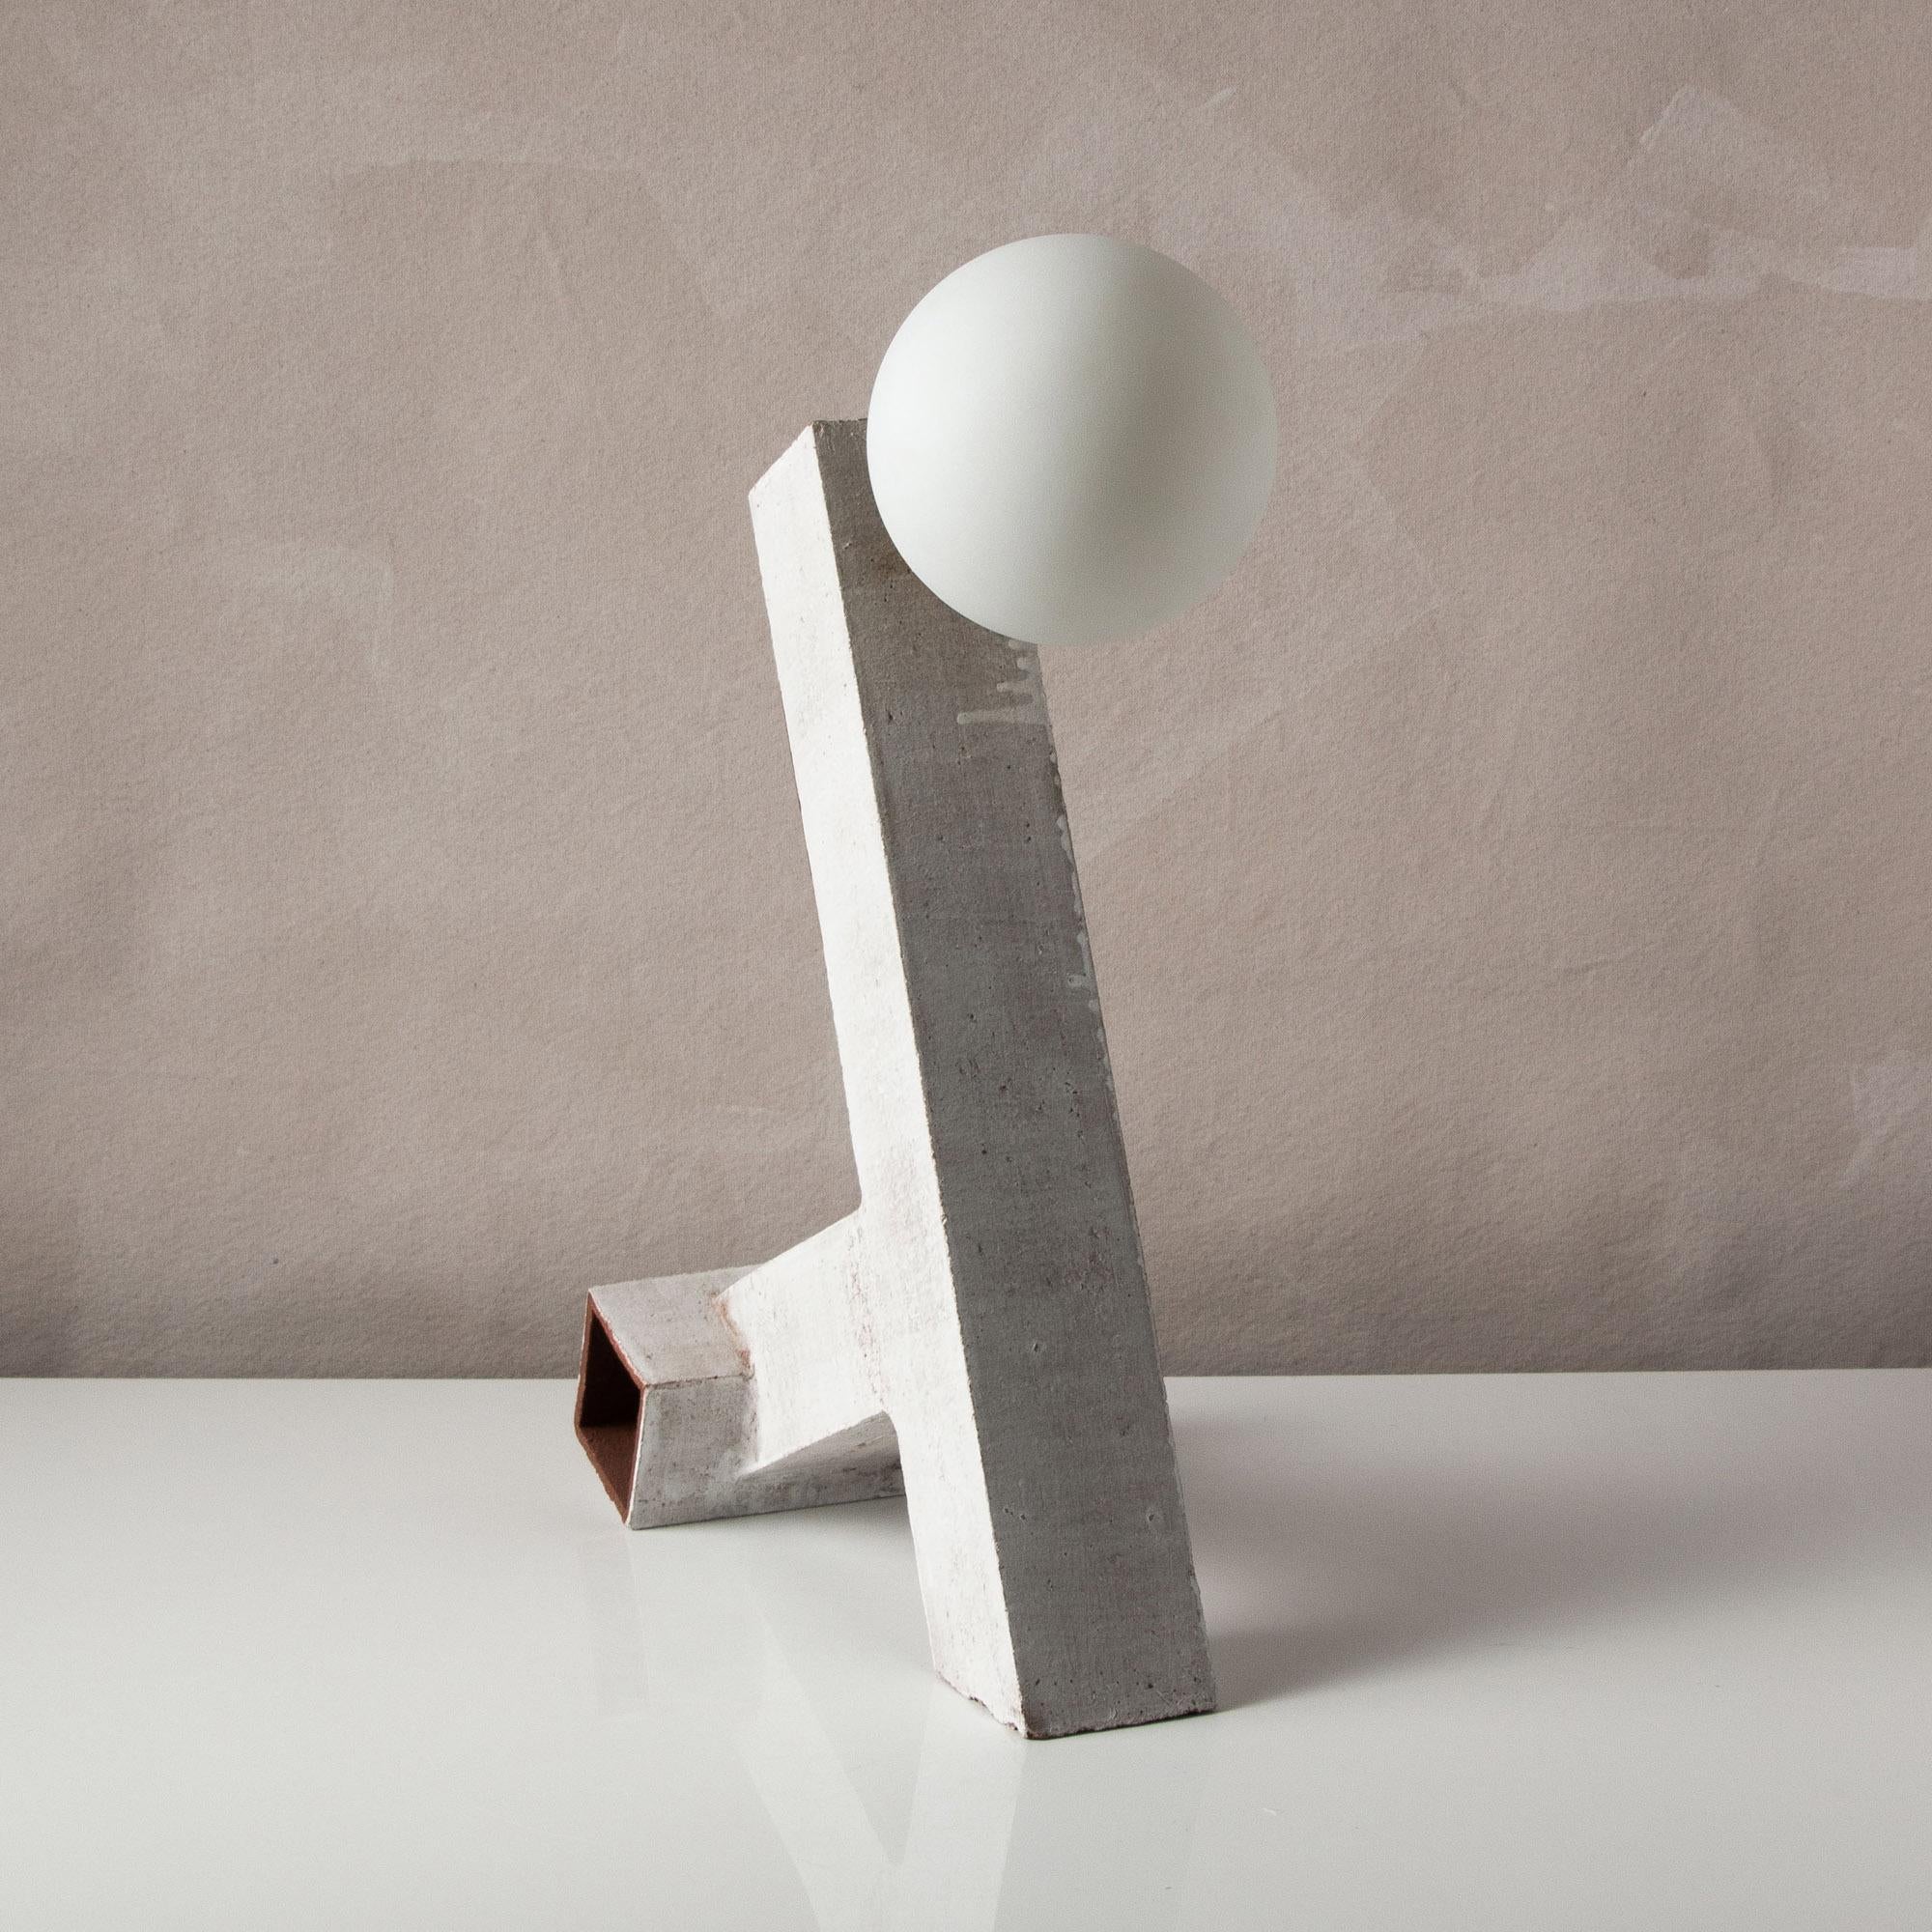 Inspired by midcentury Brutalist architecture and building materials, this playful table lamp balances a strong substantial ceramic base with delicate brass hardware and matte white glass. The angled ceramic base is handcrafted from square tubes of